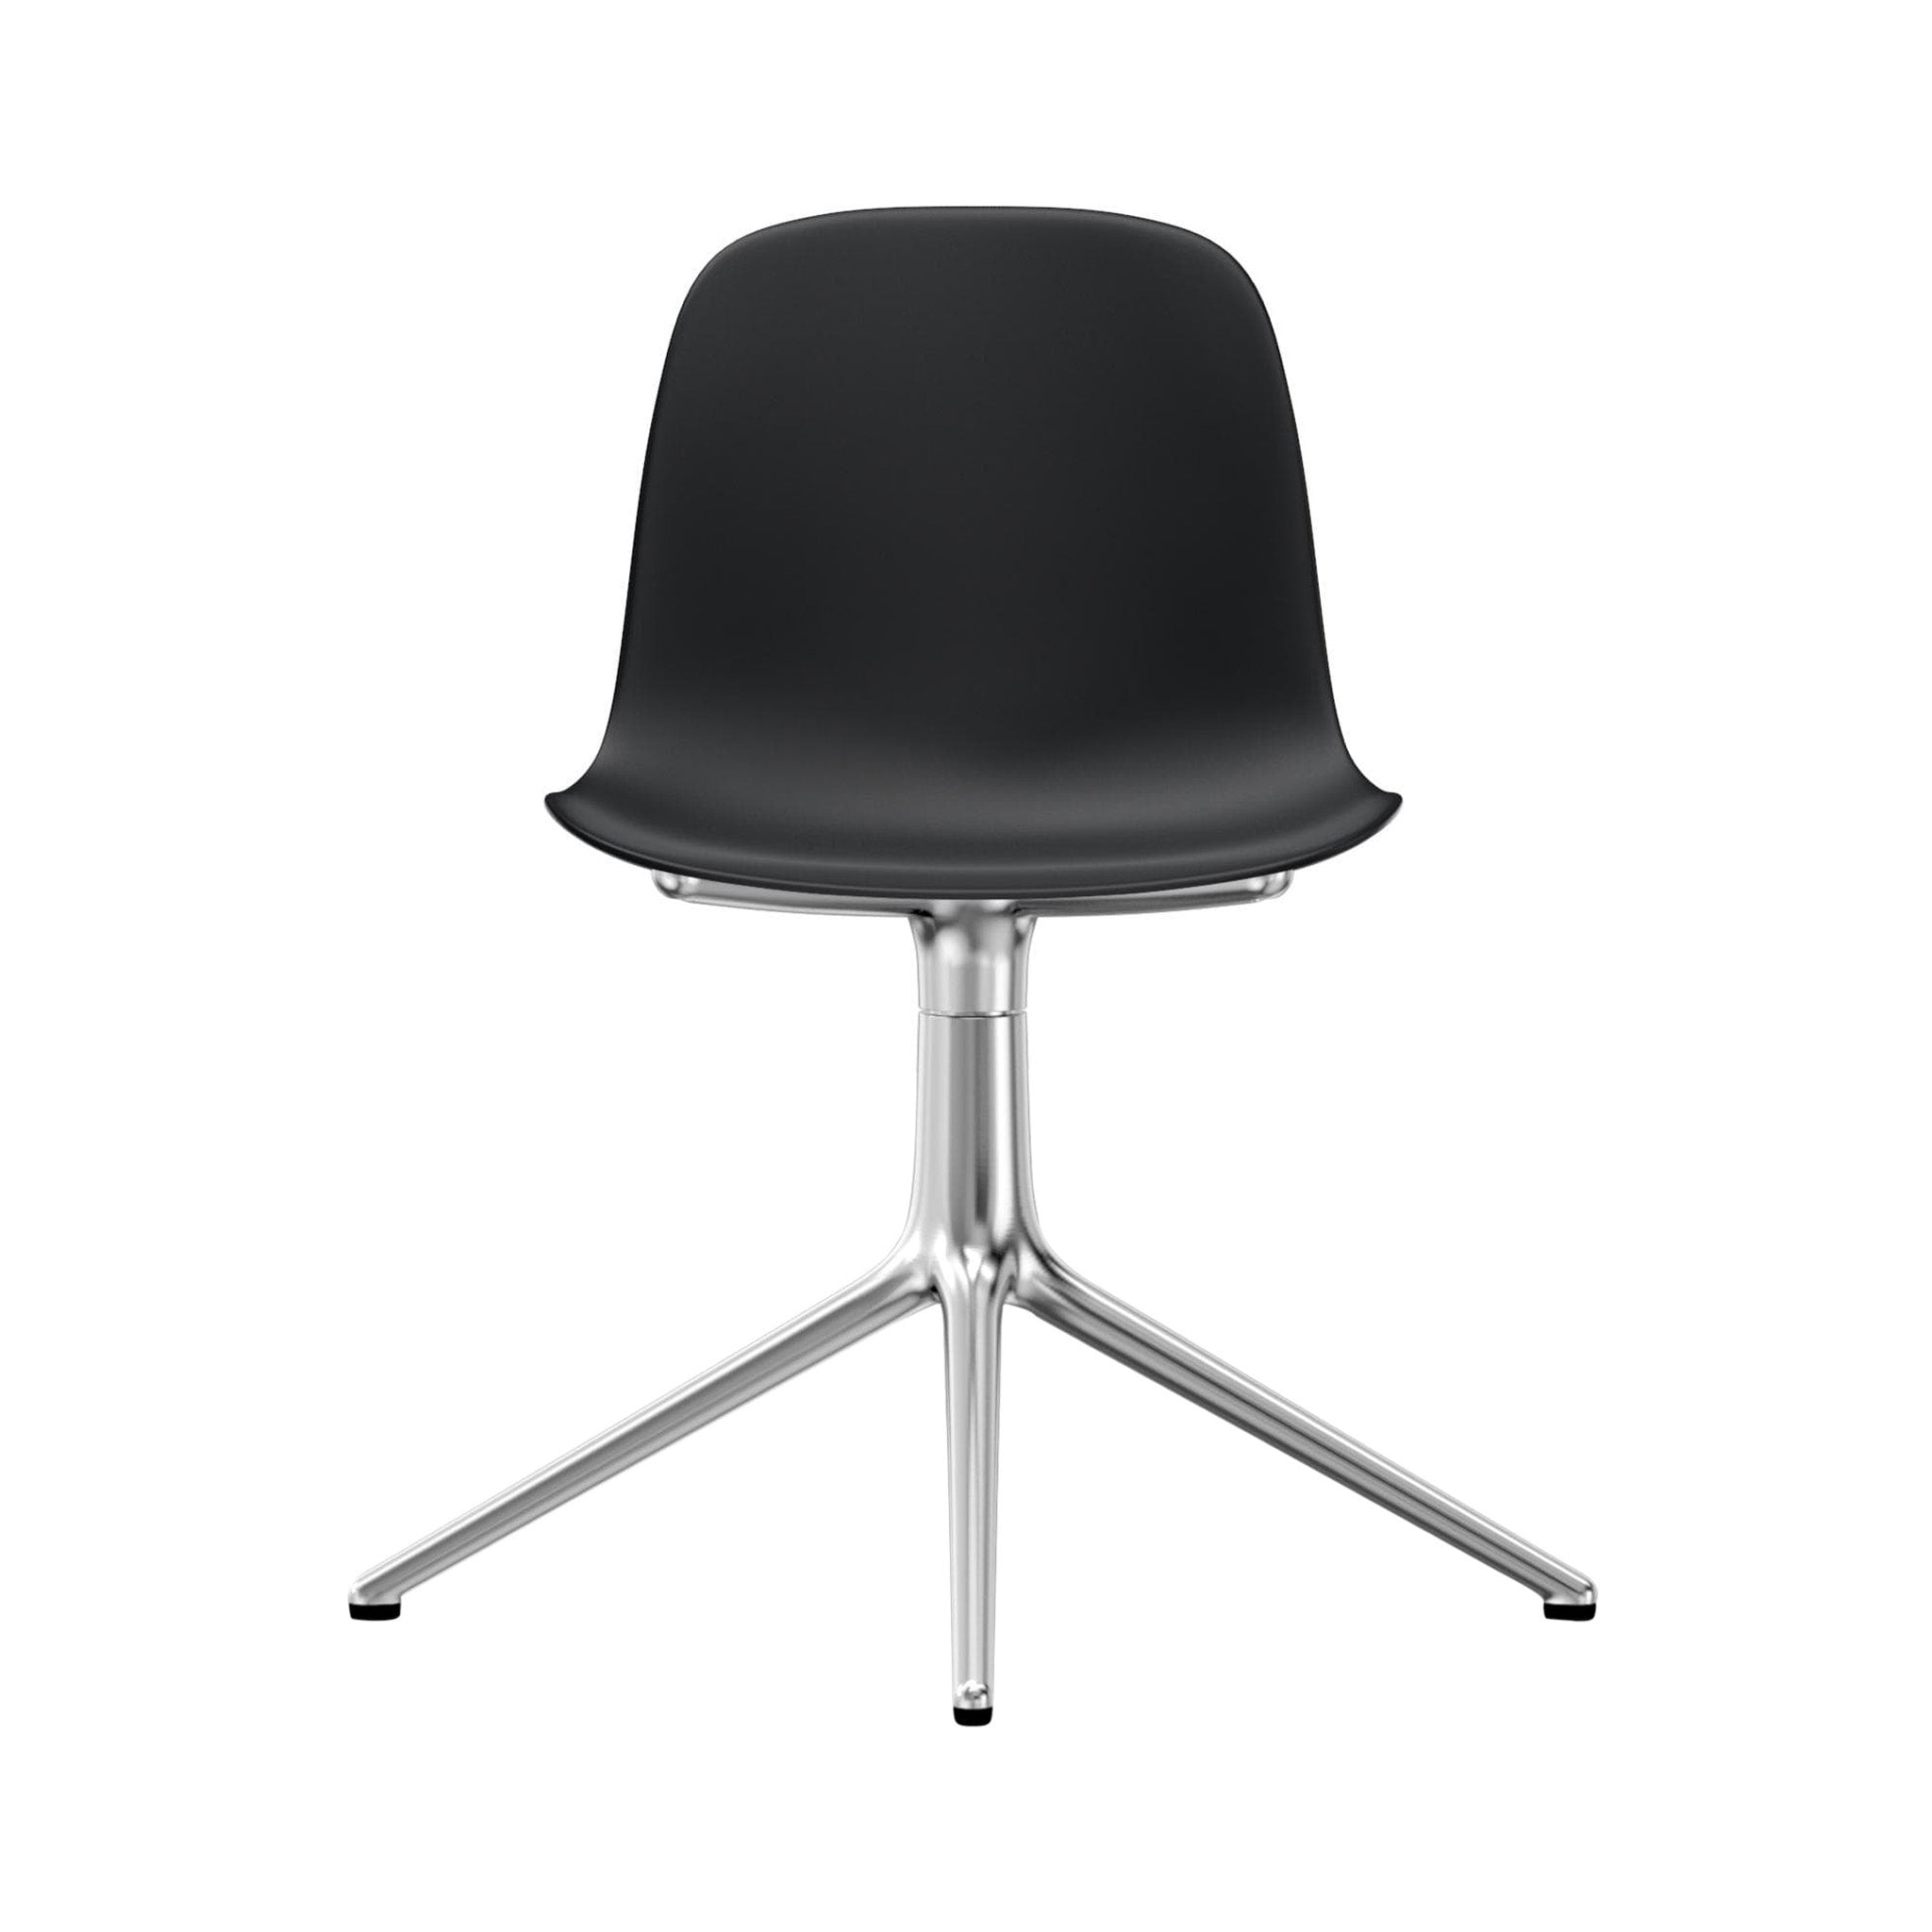 Form Chair: Swivel + Black + Aluminum + Without Casters